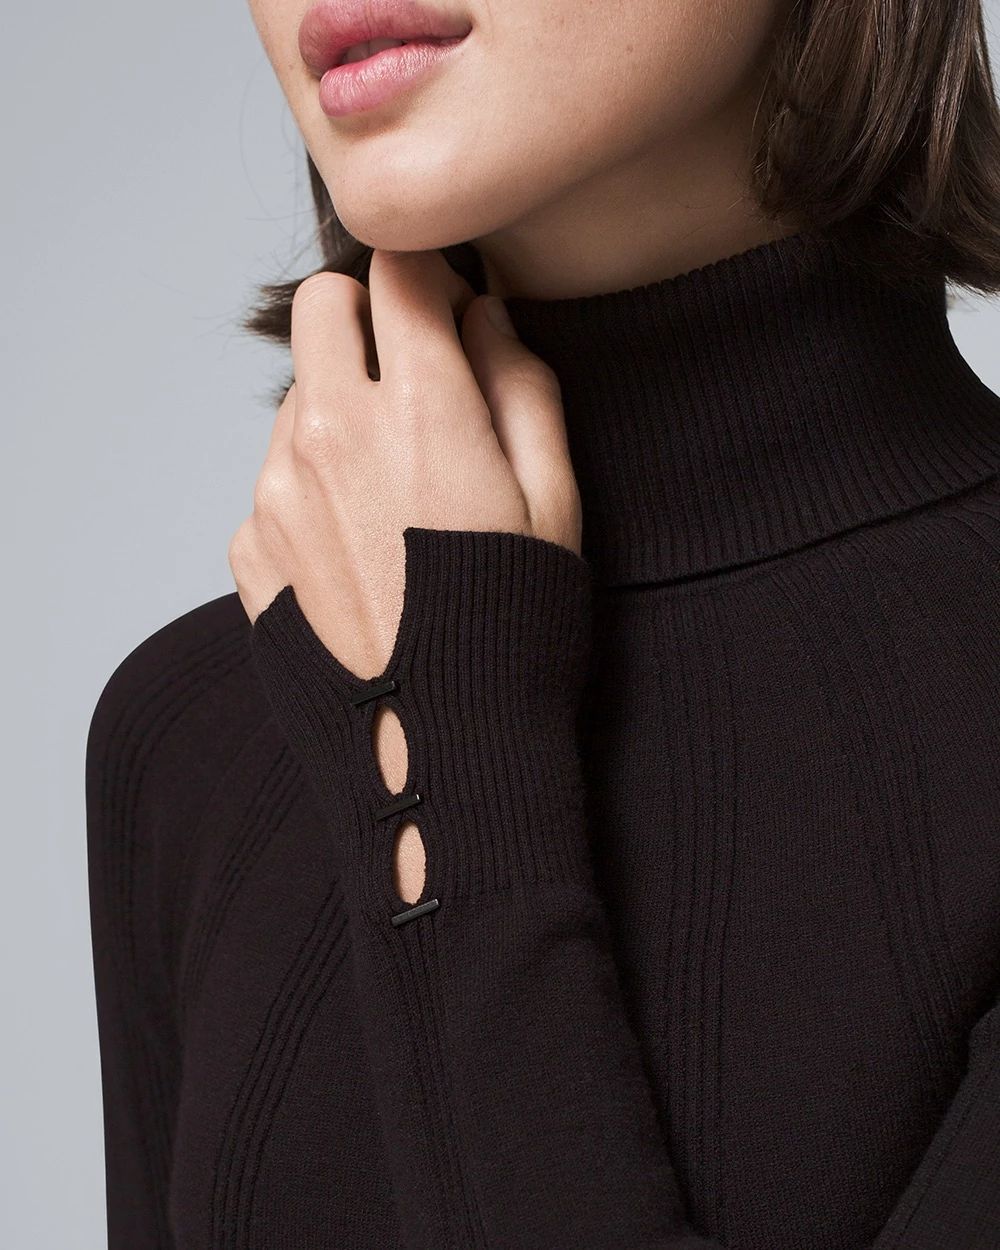 Modern Ribbed Turtleneck Sweater click to view larger image.